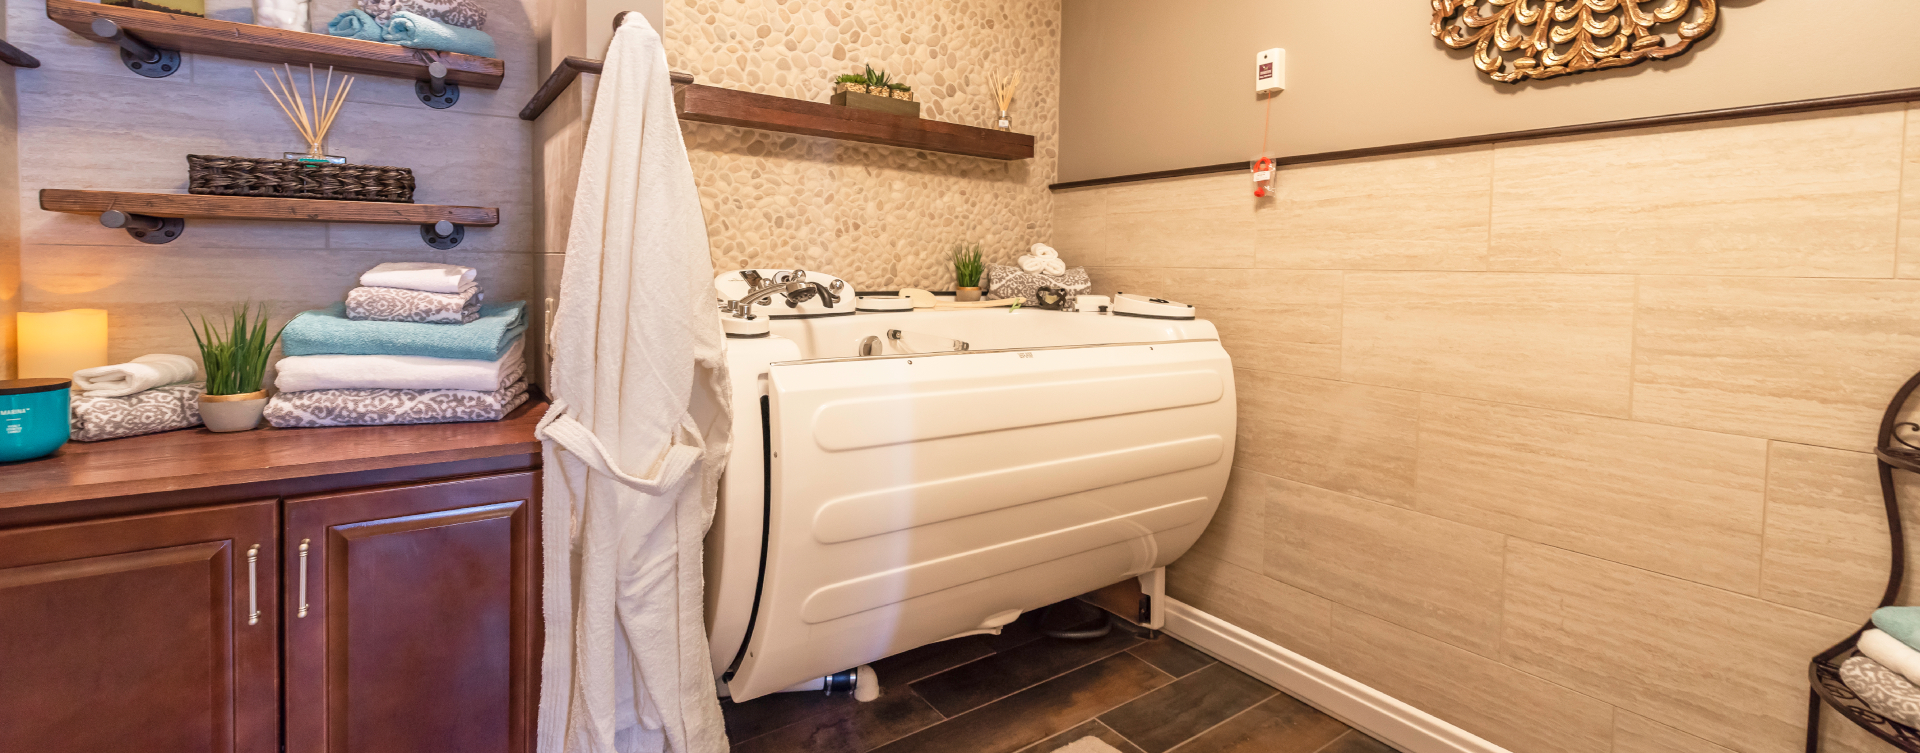 Our whirlpool bathtub creates a spa-like environment tailored to enhance your relaxation and enjoyment at Bickford of Shelby Township